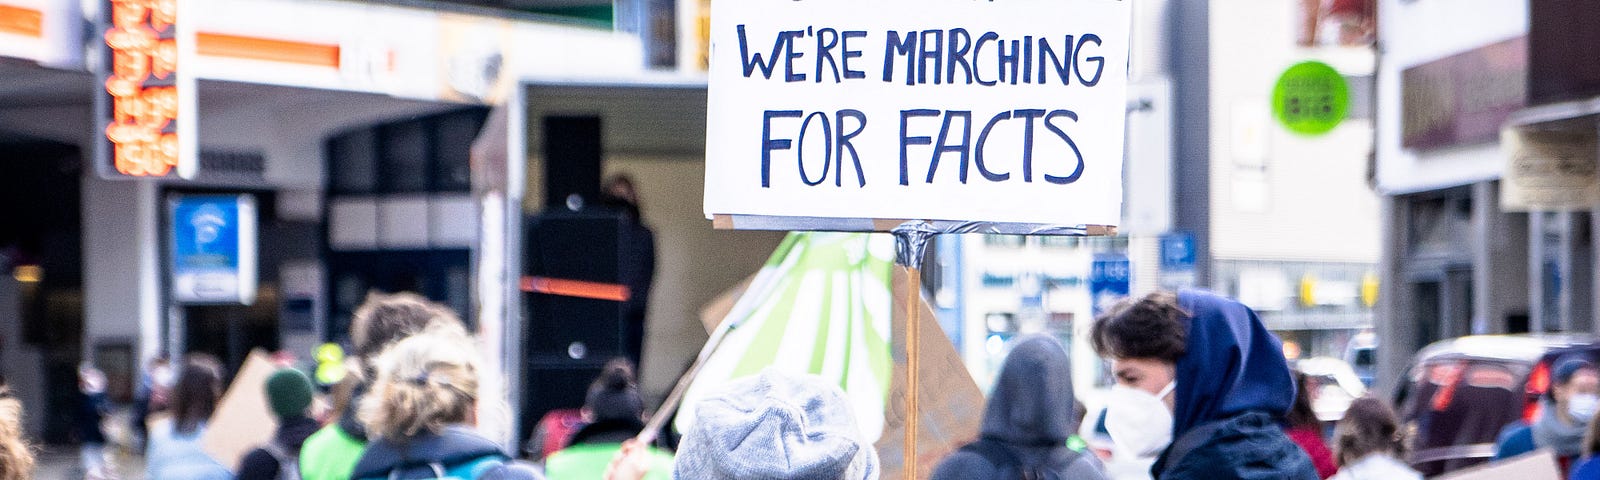 woman holding a sign that says “I can’t believe we’re marching for facts” at a protest march